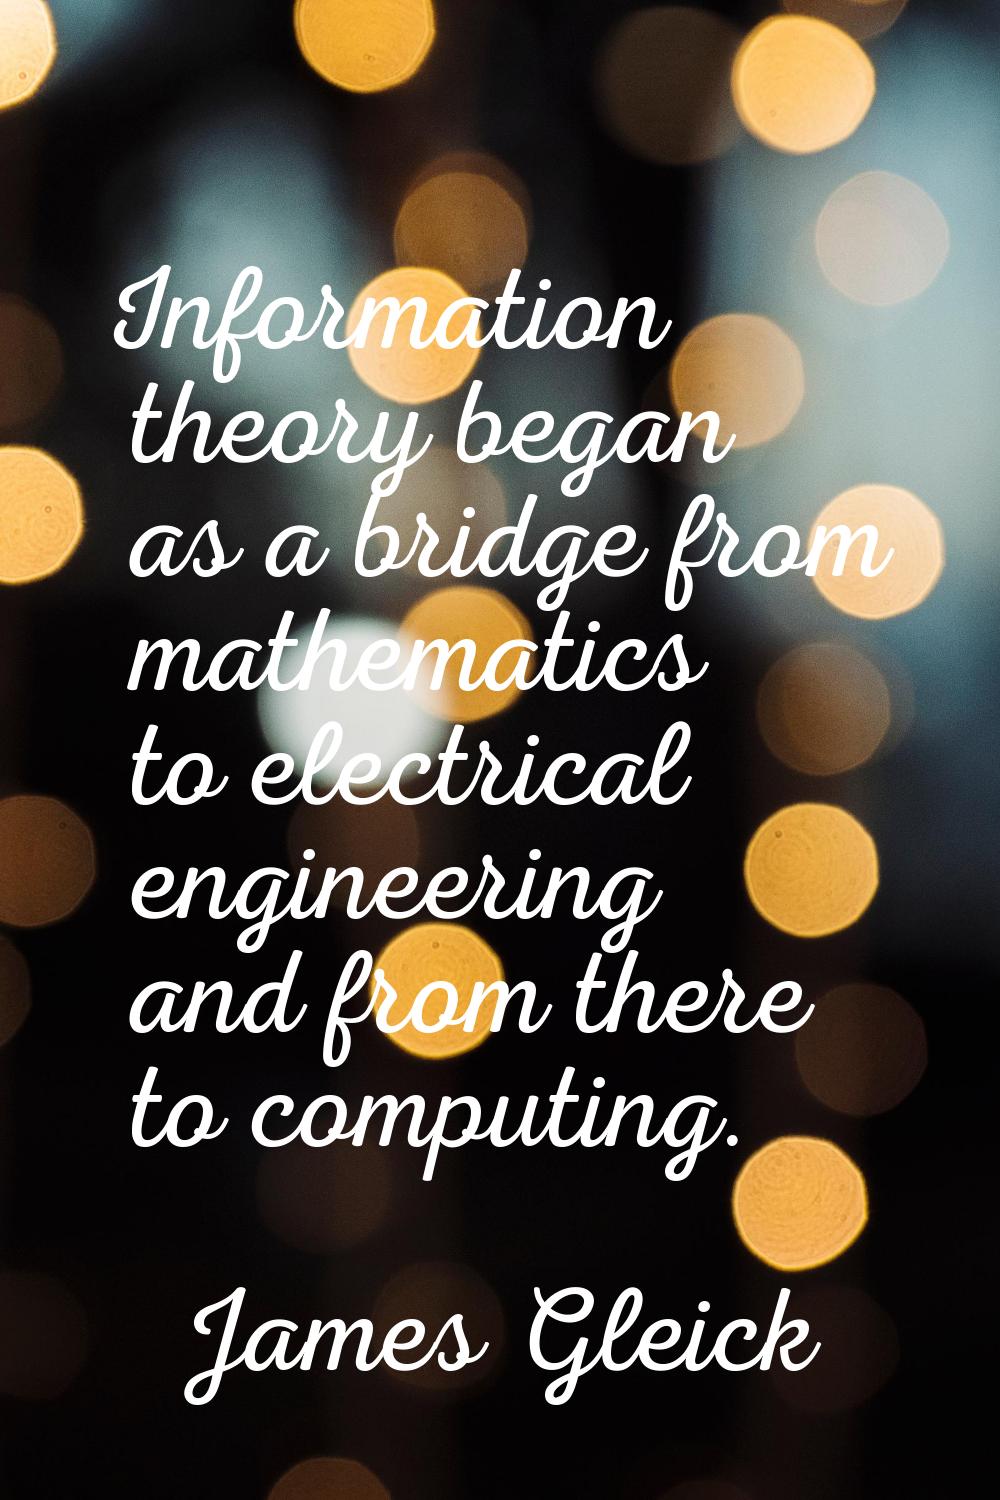 Information theory began as a bridge from mathematics to electrical engineering and from there to c